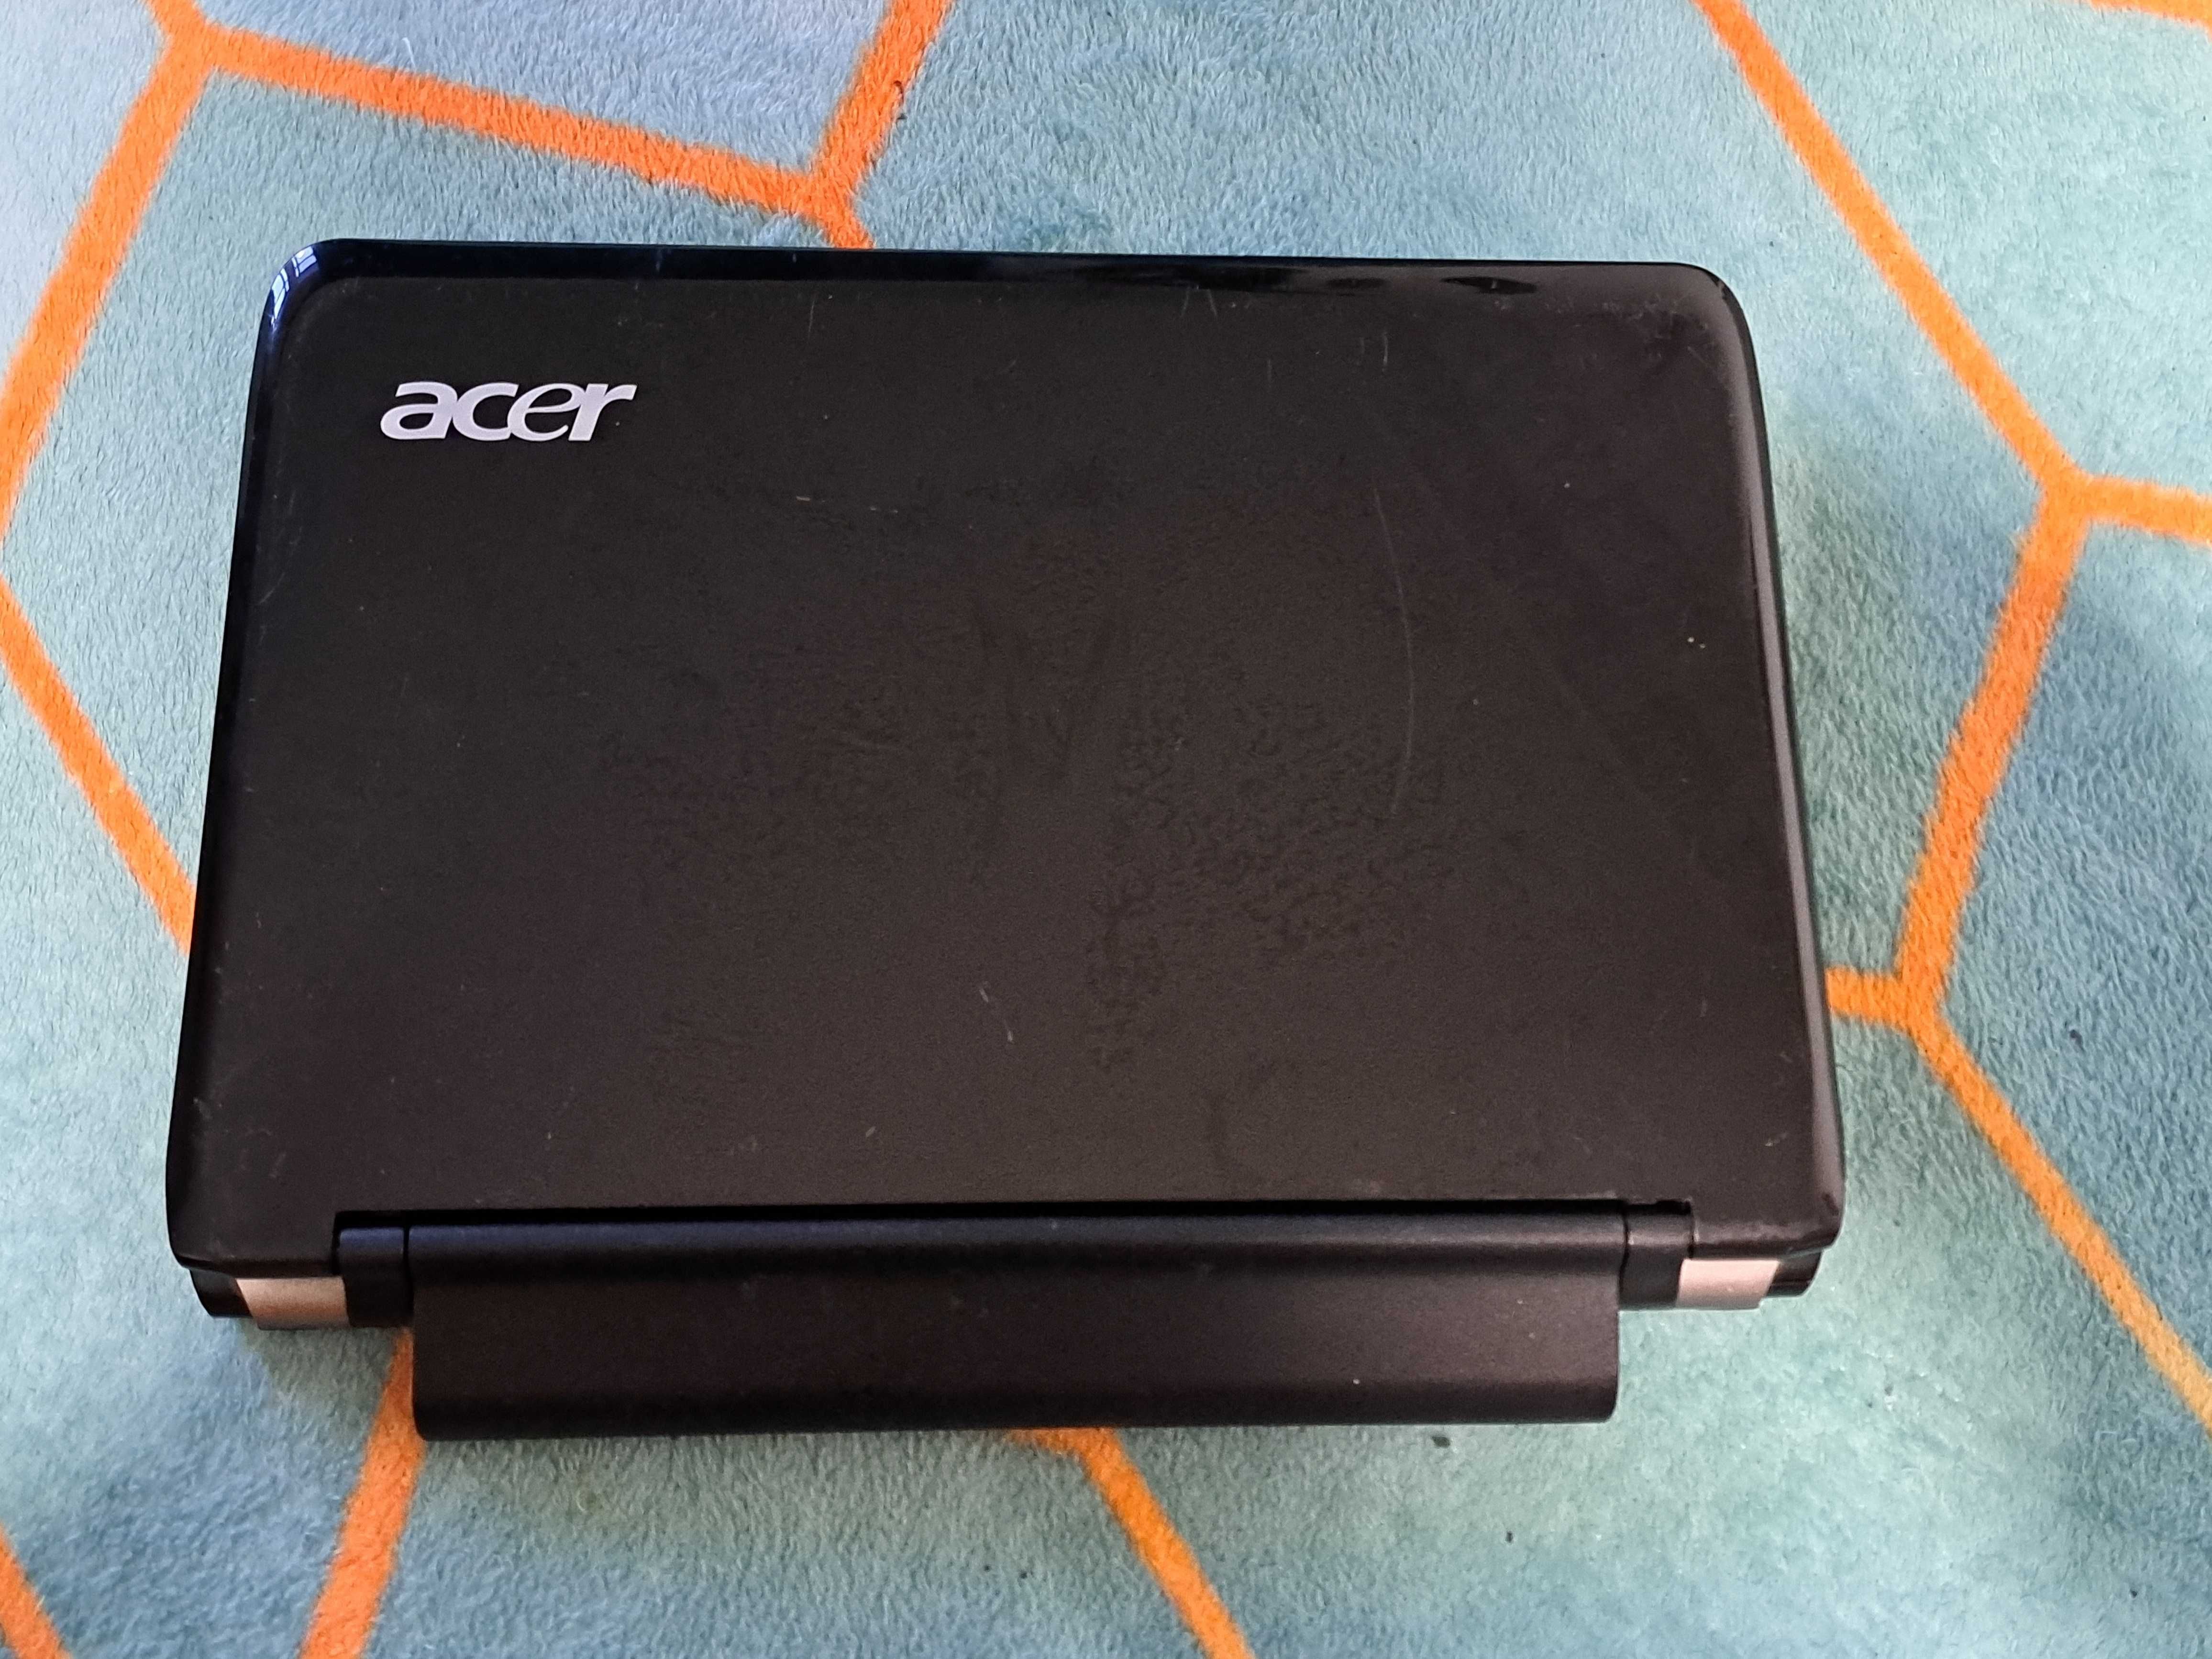 Laptop Acer one 751 H, functional